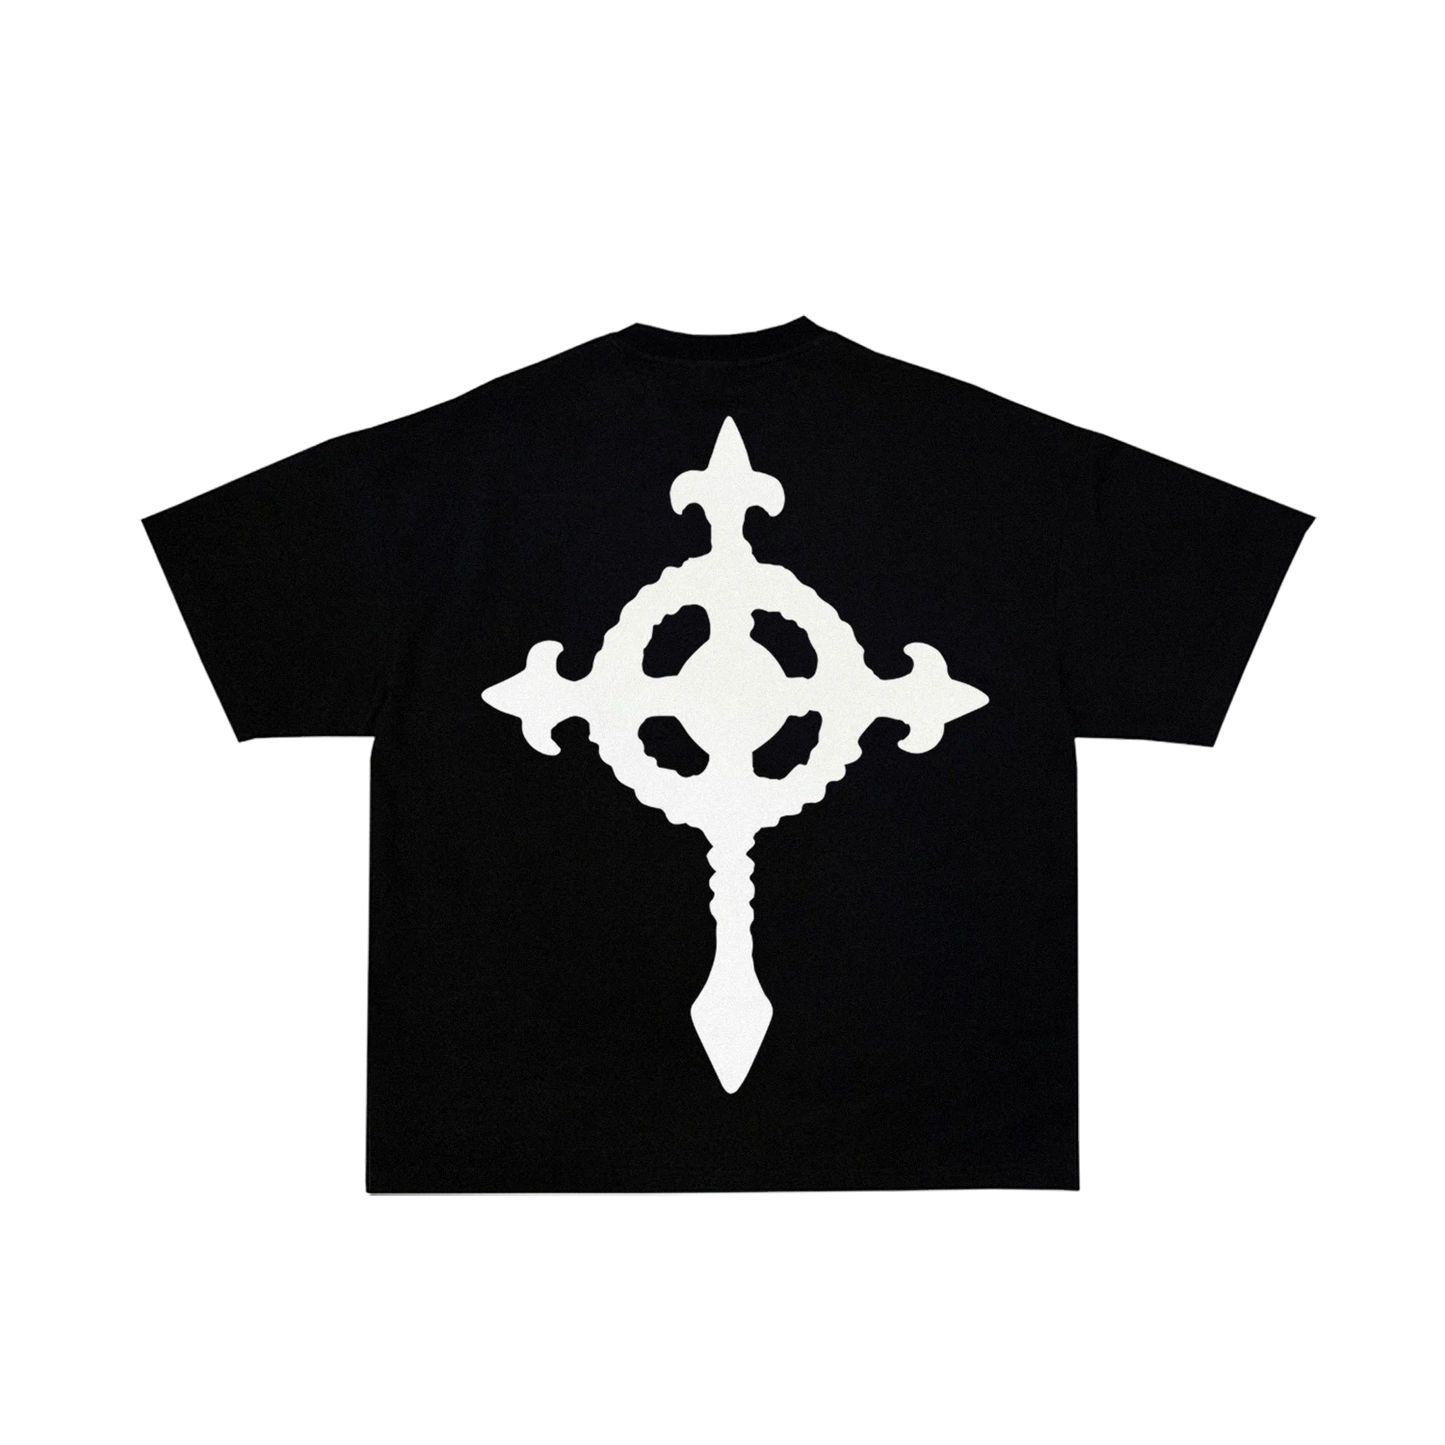 Abyss "Cross" T-Shirt *LIMITED RESTOCK